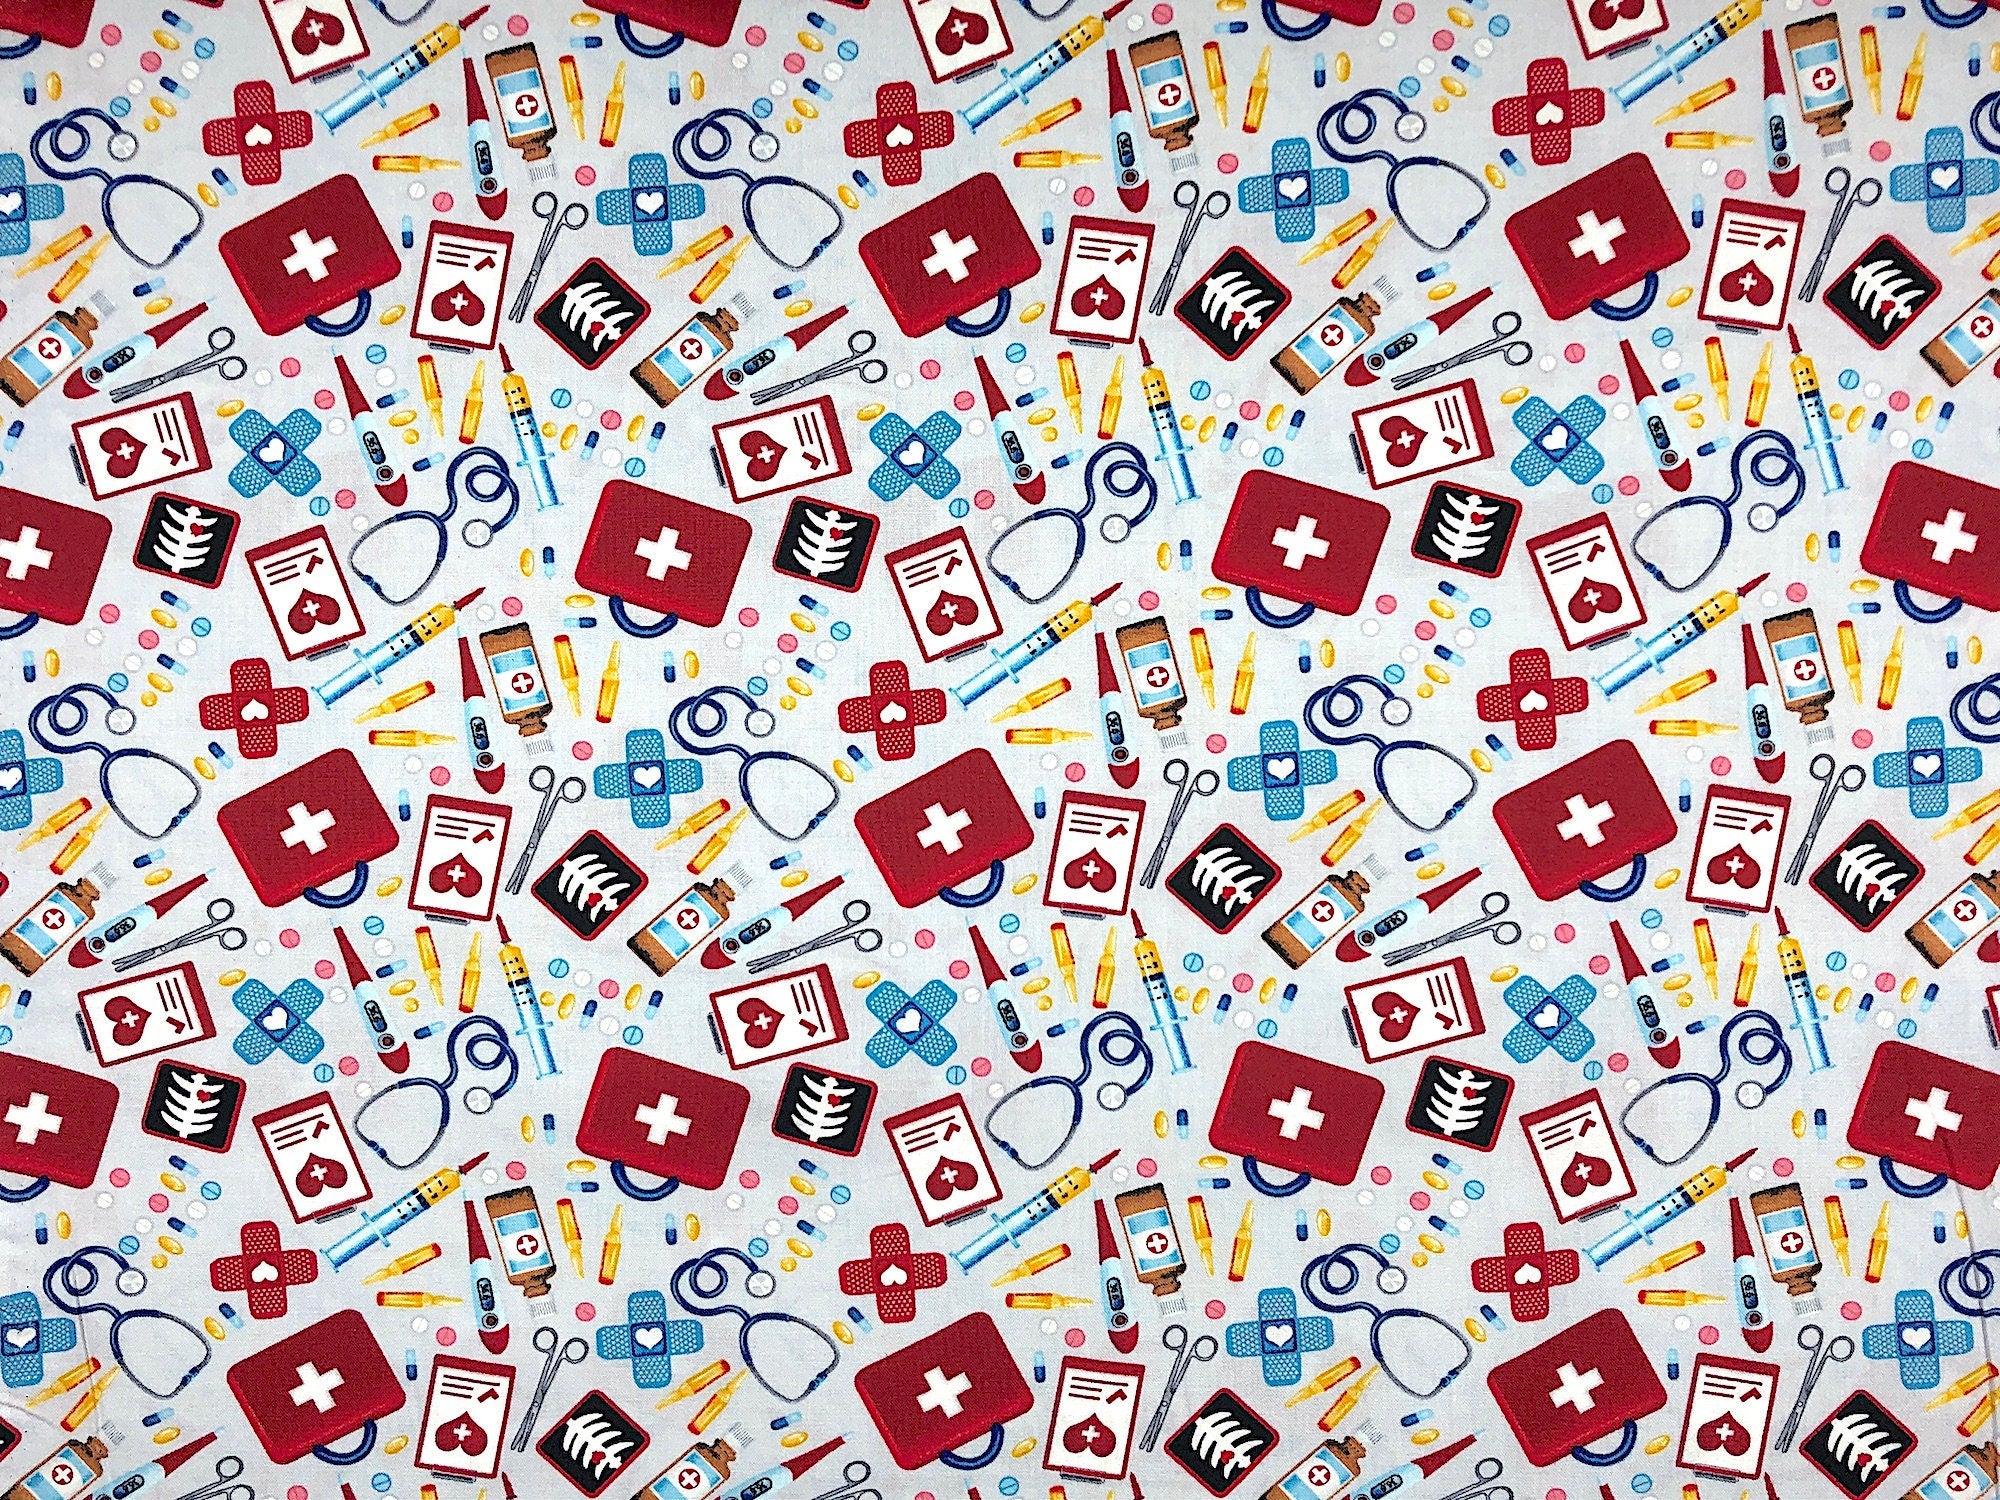 This fabric is part of the big hugs collection. The grey fabric is covered with first aid kit essentials. You will find scissors, band-aids, syringes, stethoscopes, patient charts and more.